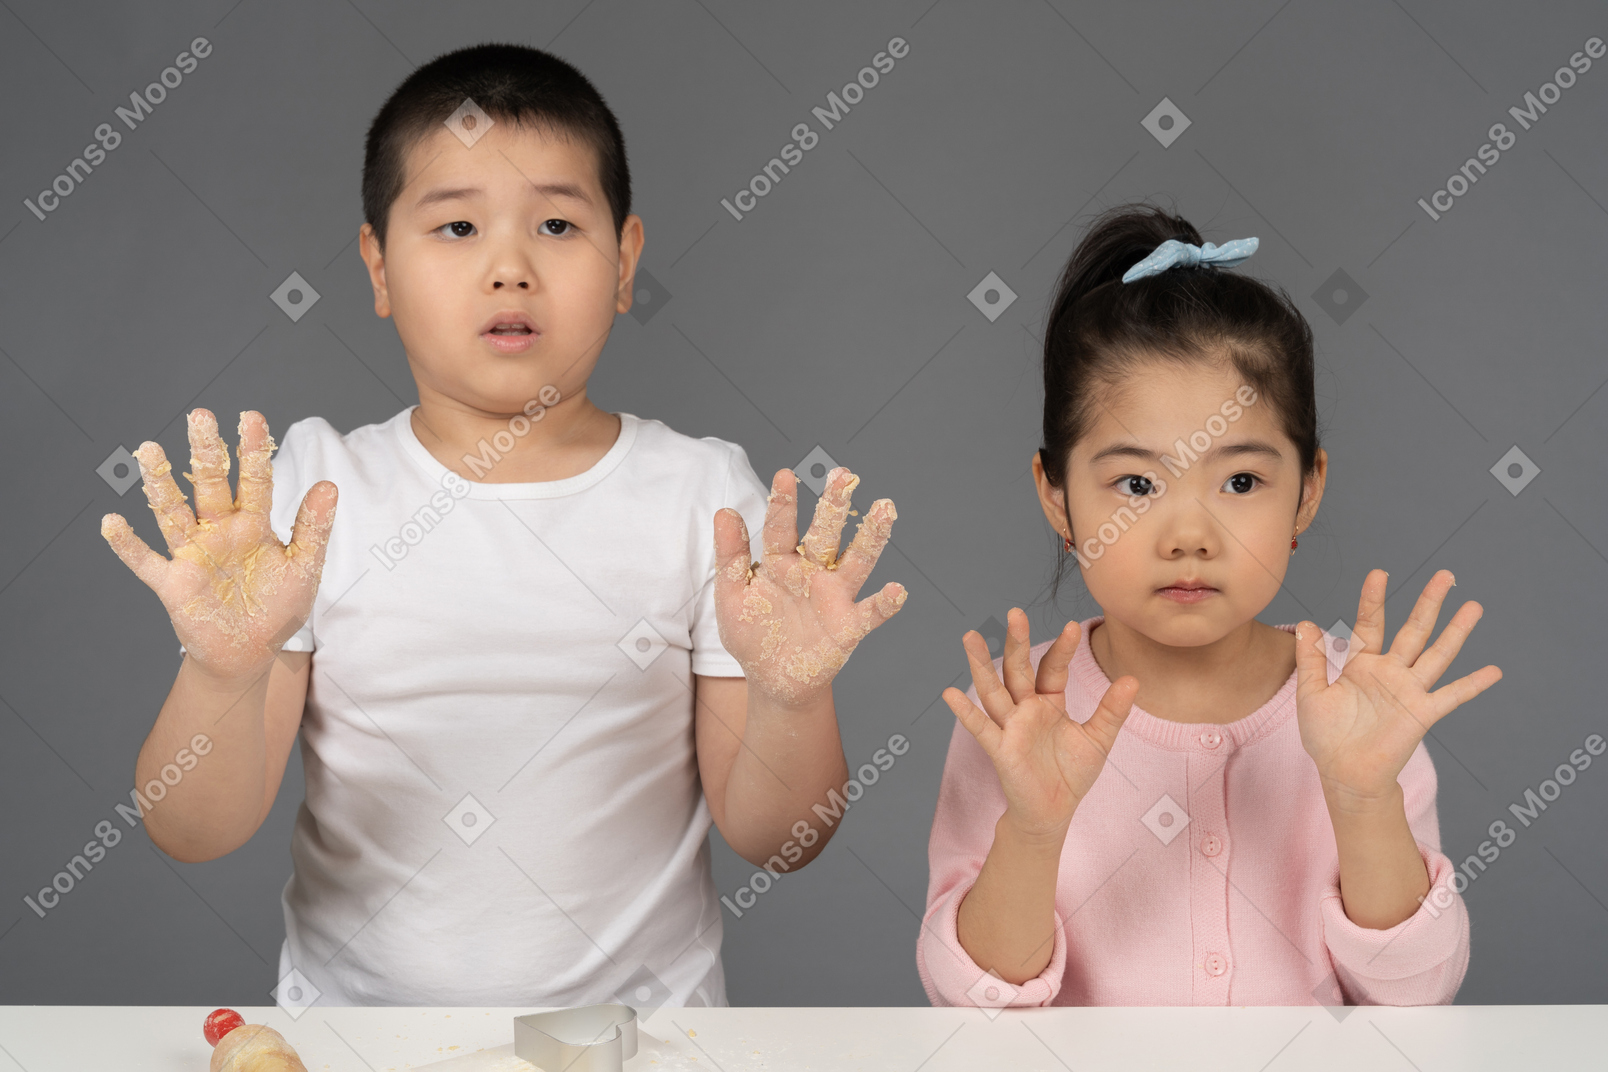 Brother and sister posing with their hands up